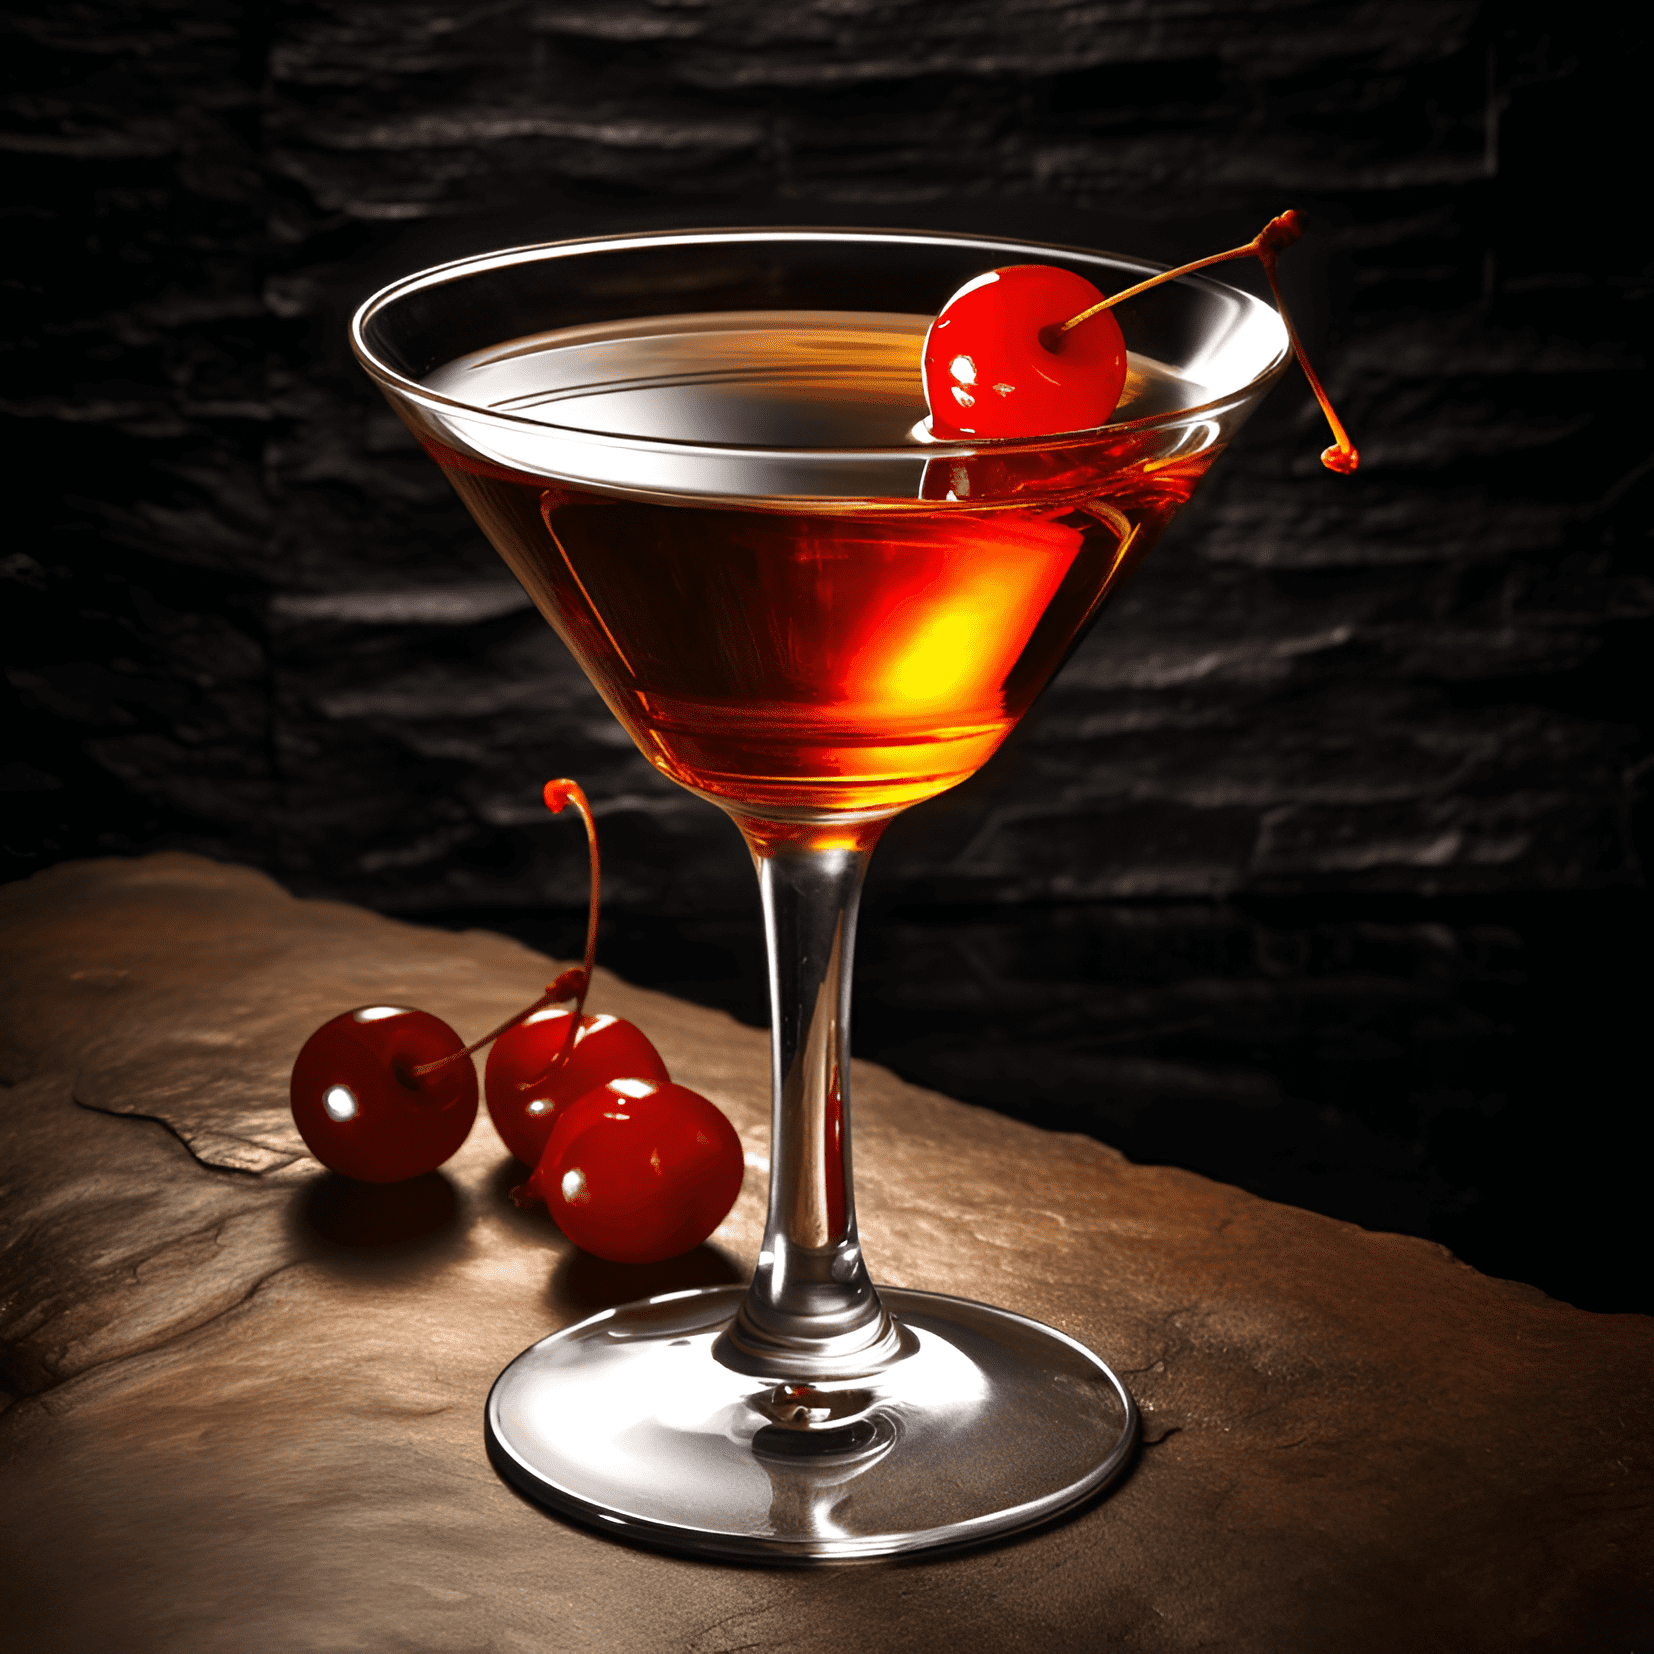 The Rob Roy has a rich, smoky, and slightly sweet taste with a hint of bitterness from the vermouth. It has a warming and full-bodied mouthfeel, making it a perfect sipping cocktail for colder months.